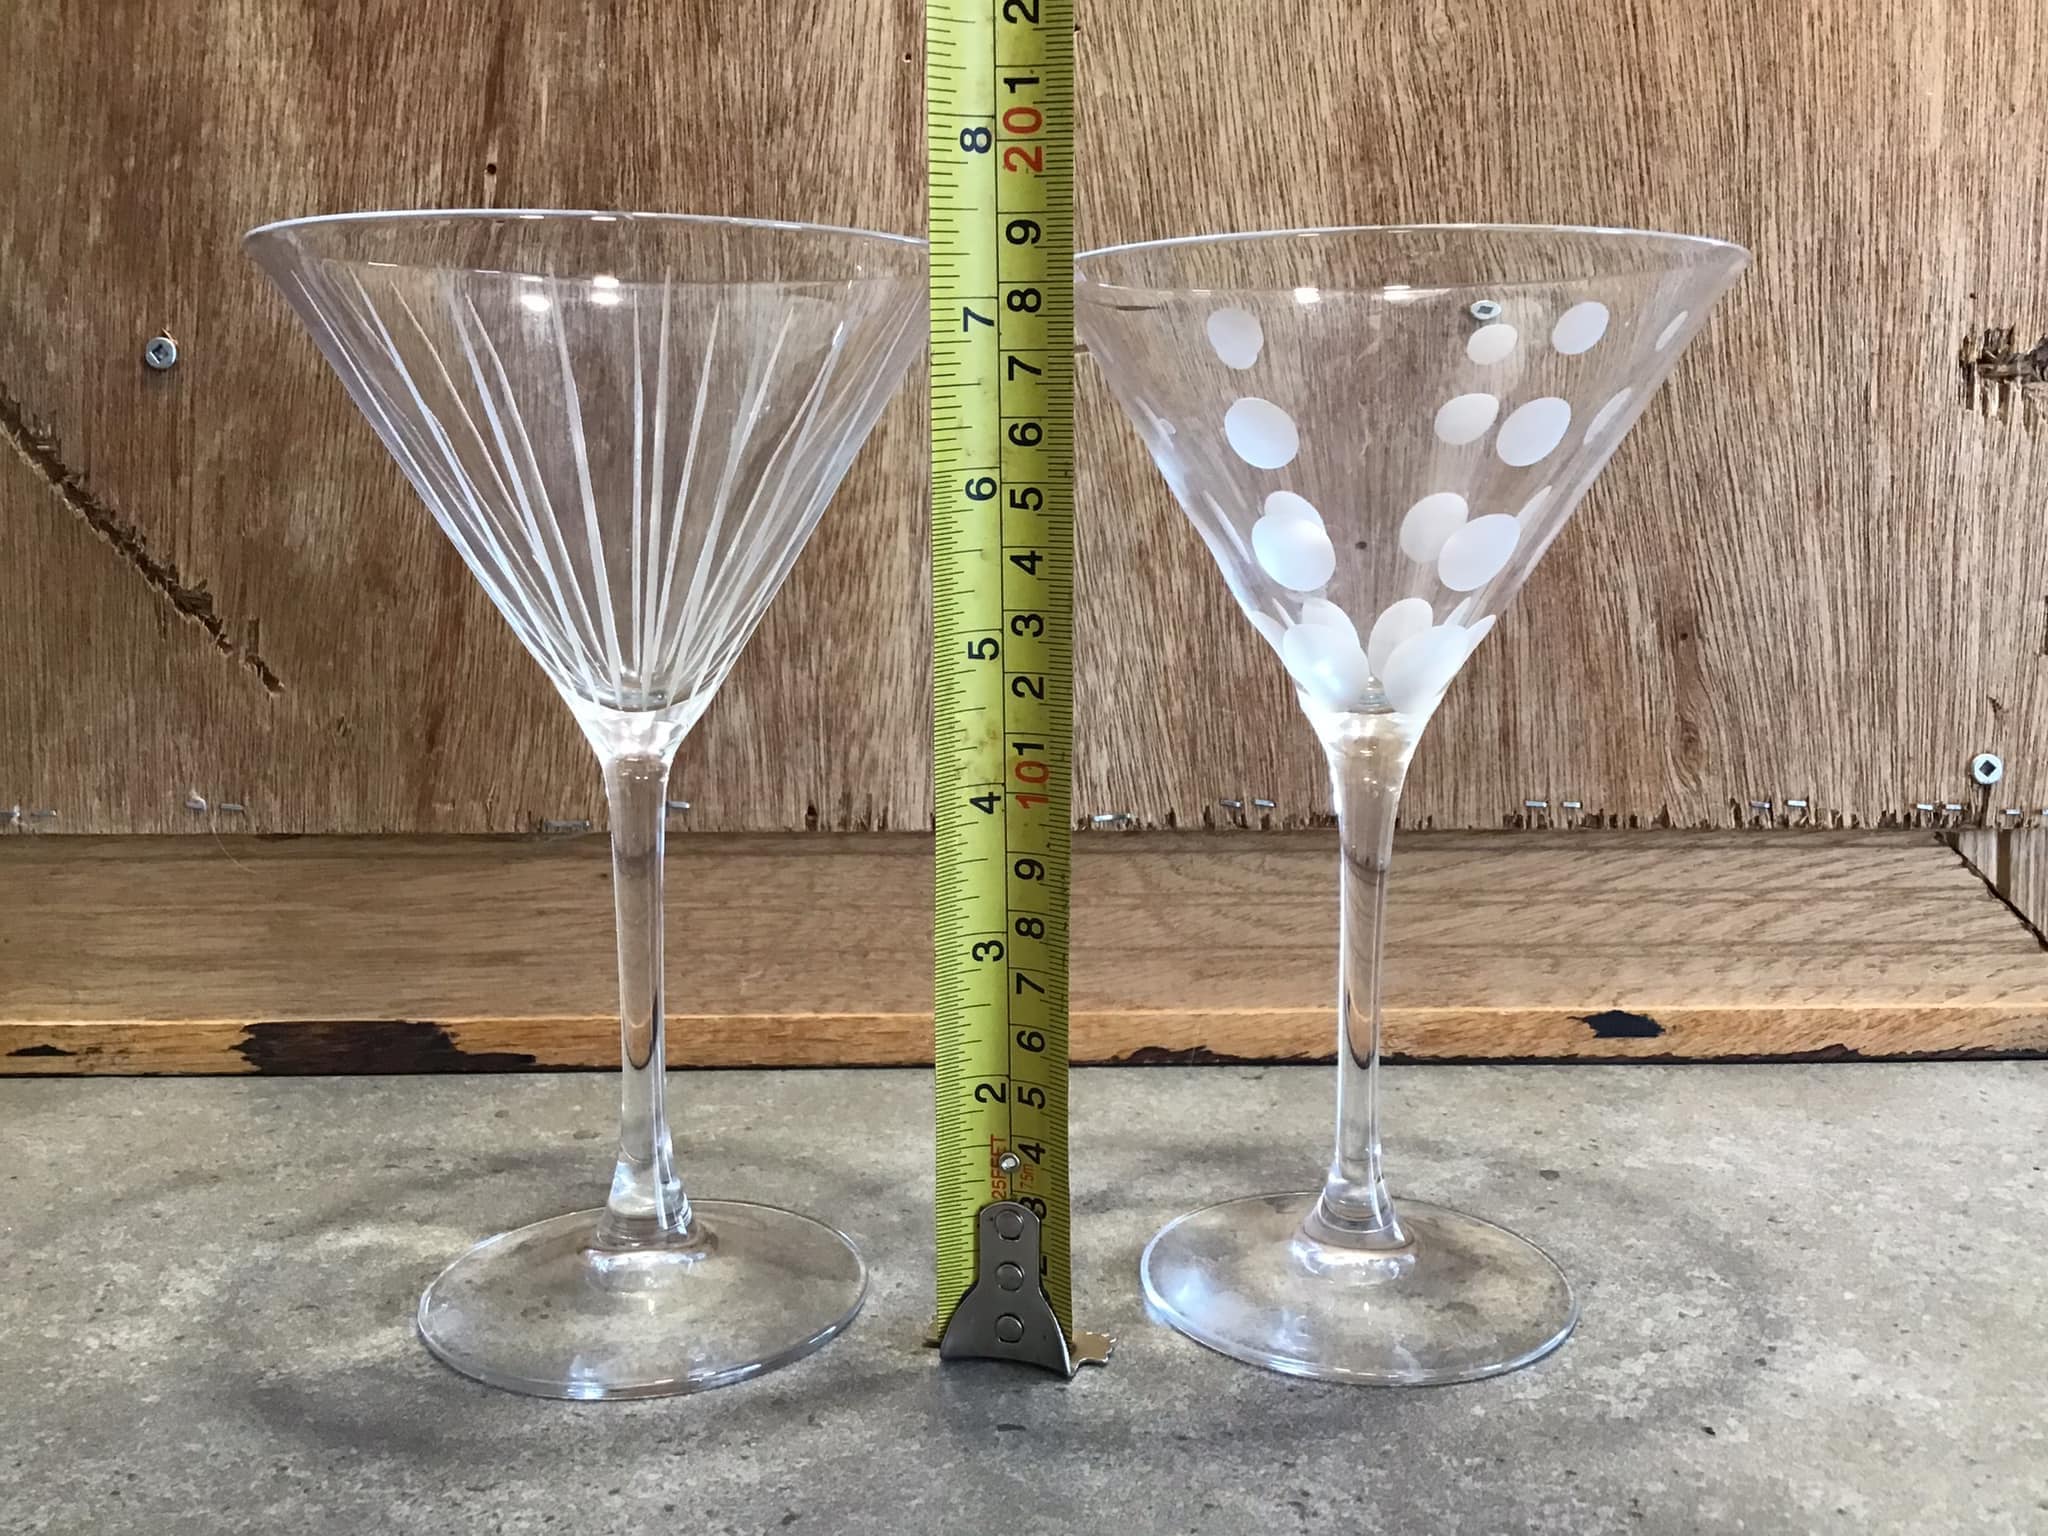 2 MIKASA Abstract Martini Glasses CHEERS Cocktail Glasses 